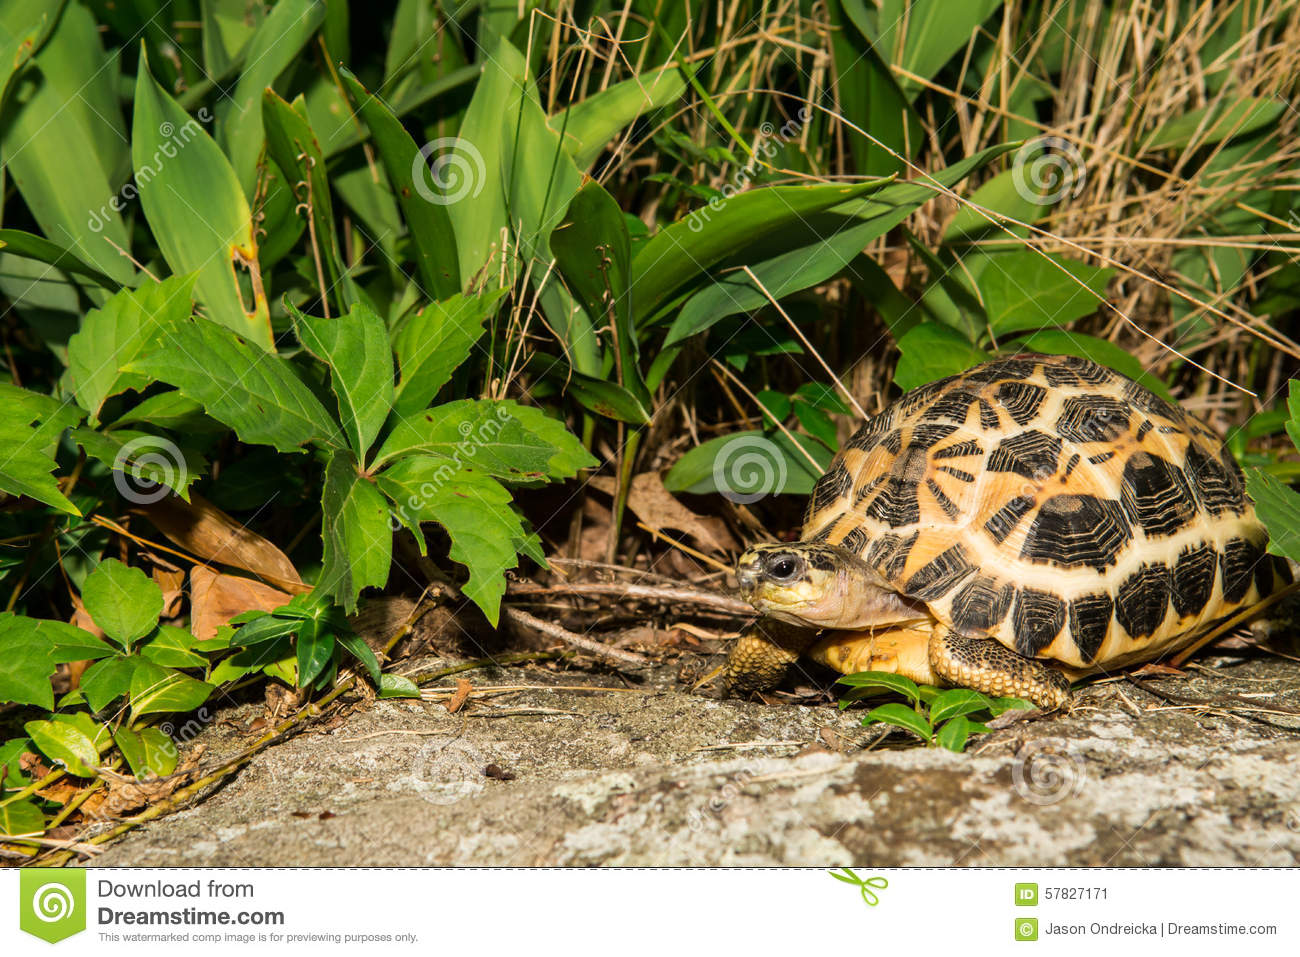 Spider Tortoise clipart #8, Download drawings